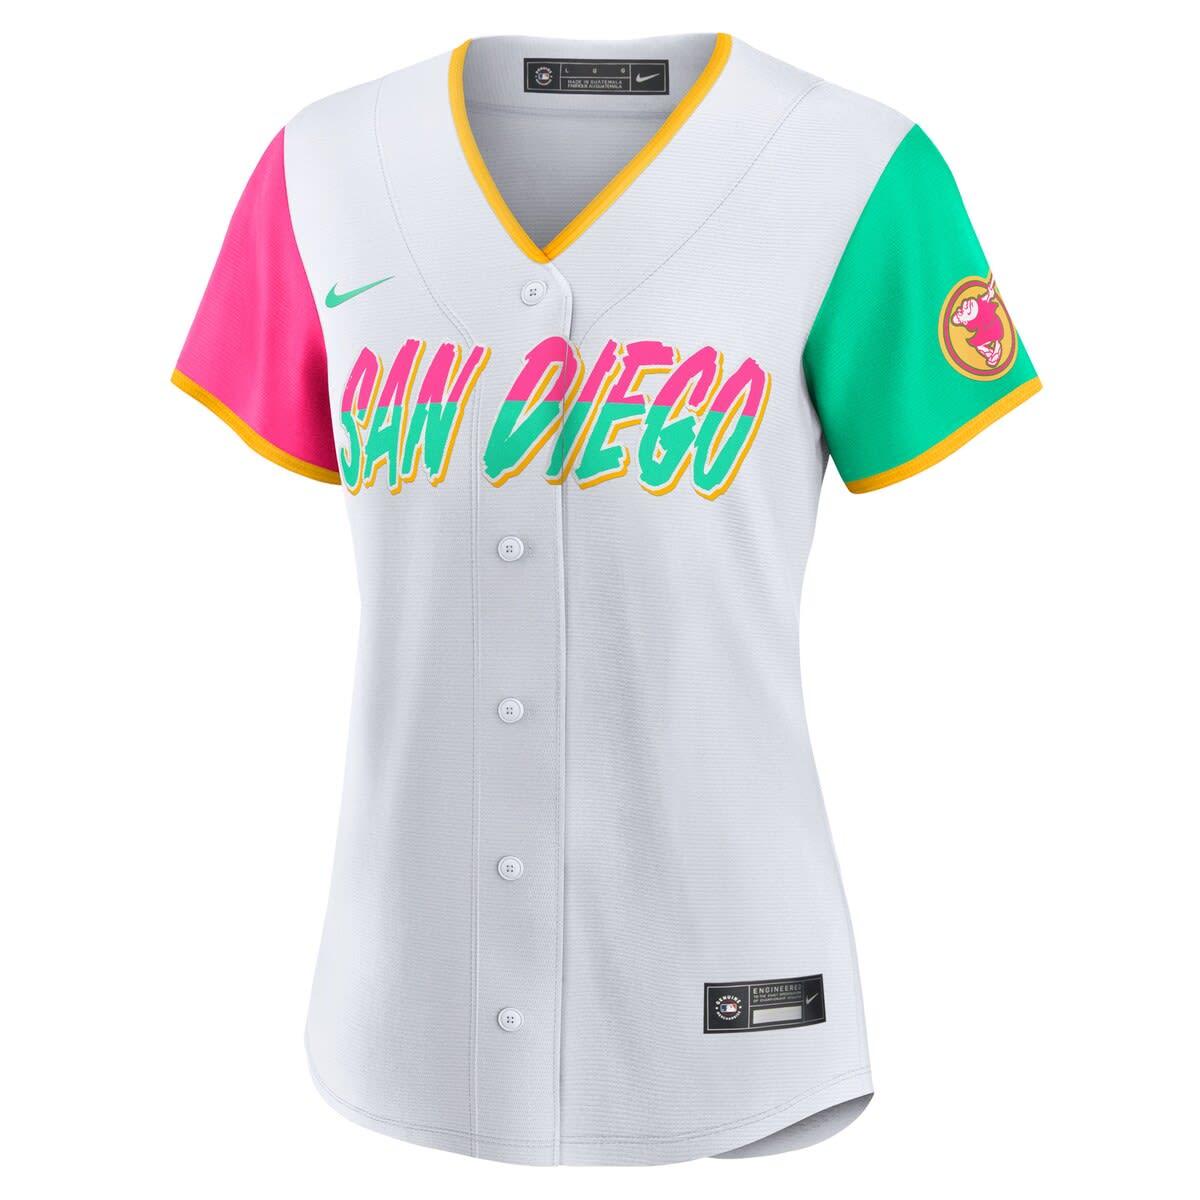 Women's Nike Pink San Diego Padres City Connect Velocity Practice Performance V-Neck T-Shirt Size: Small